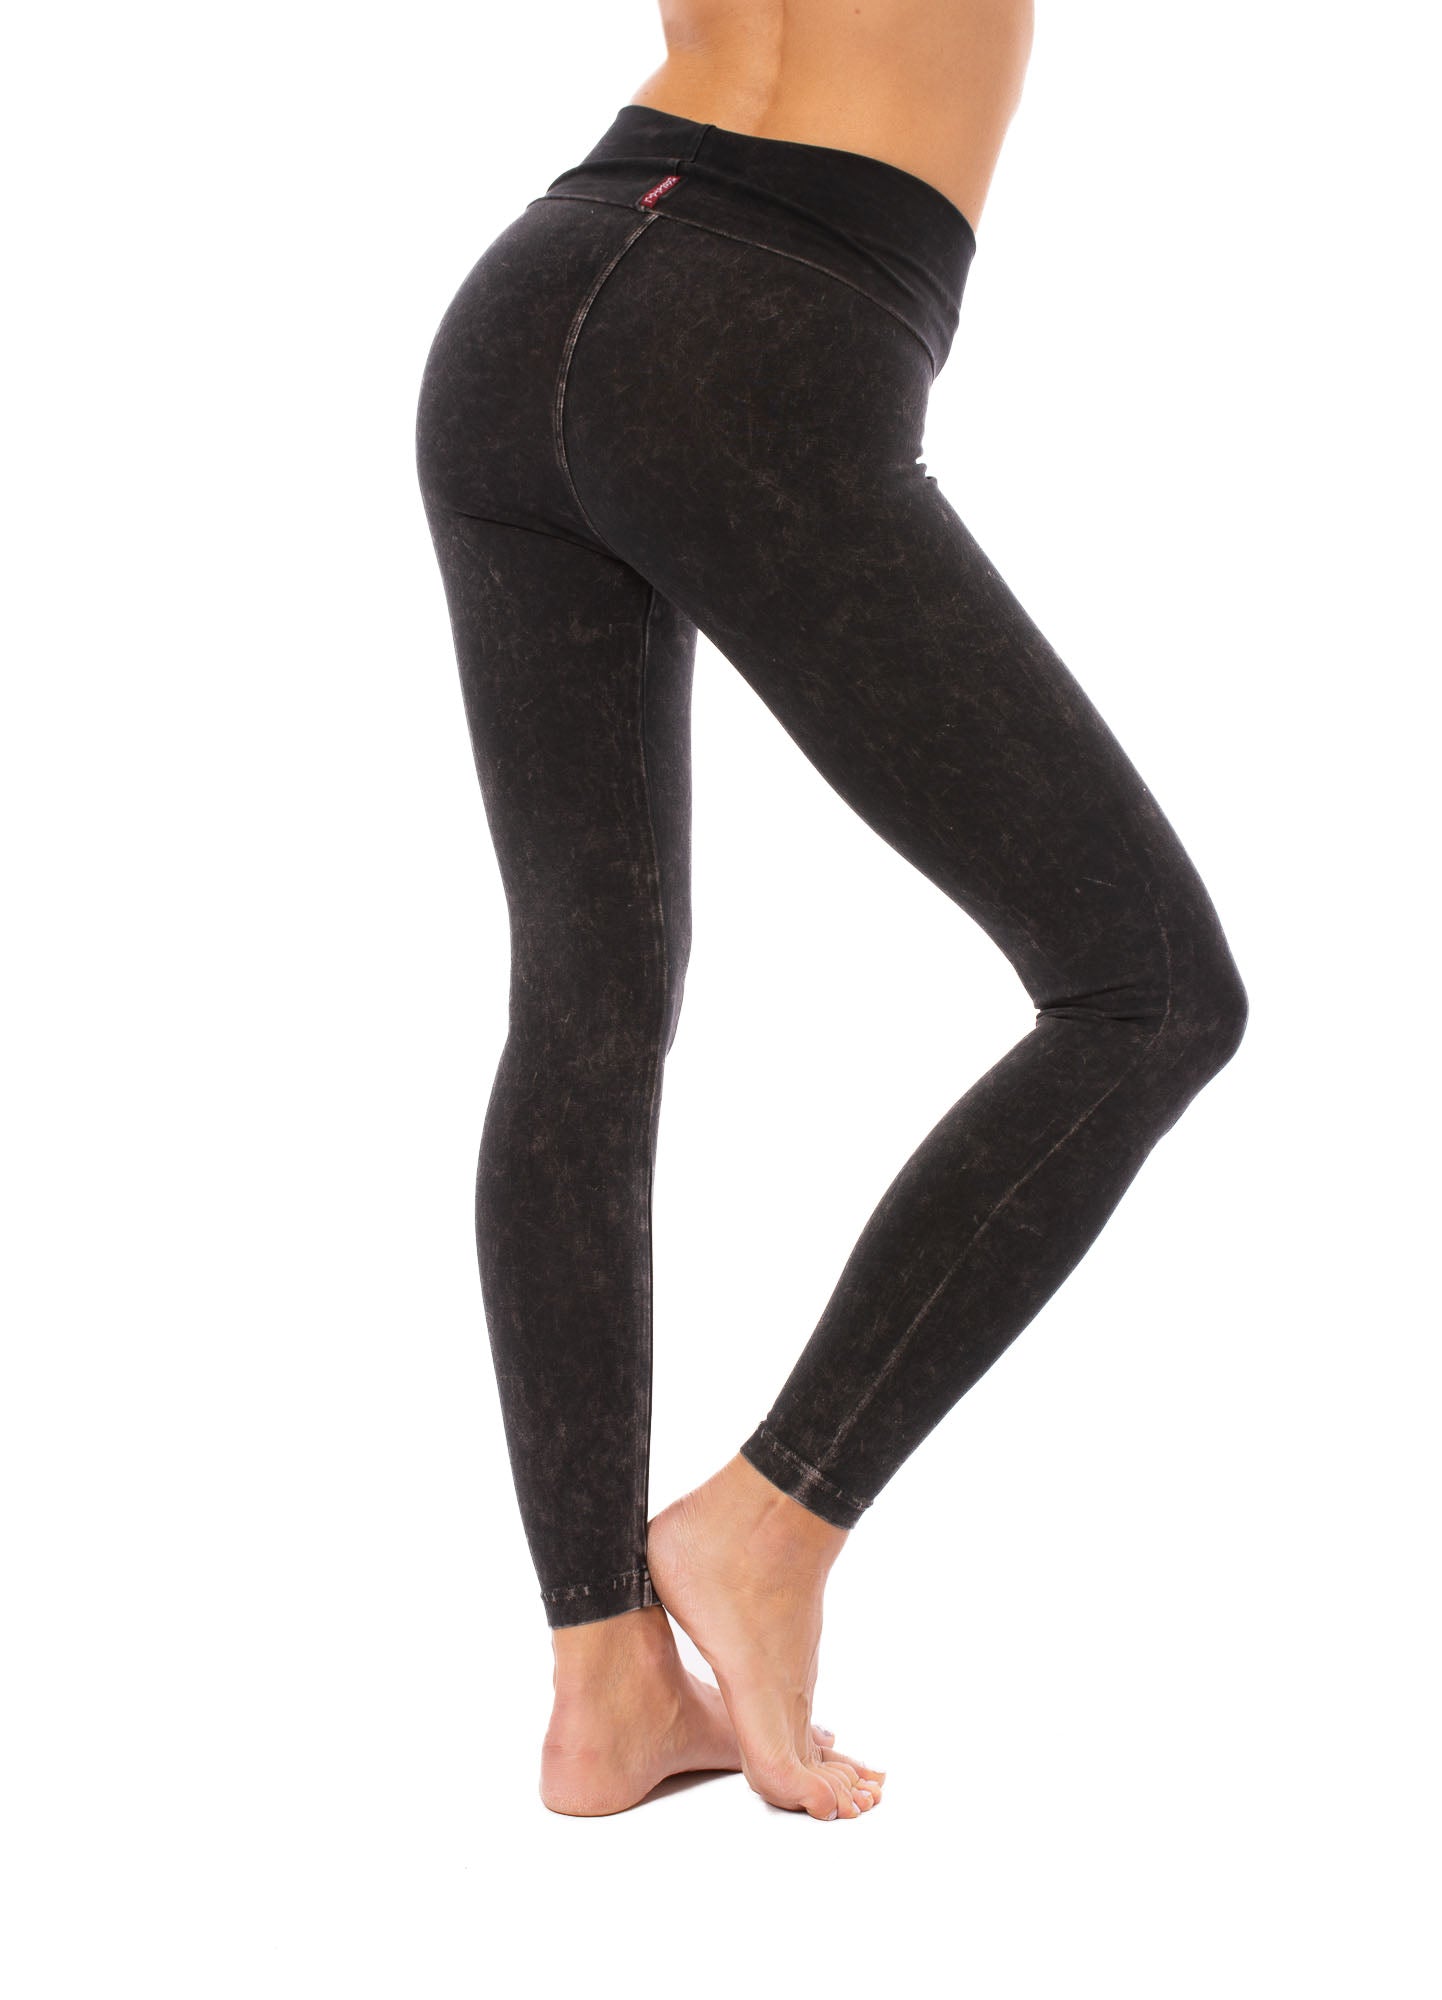 Contour Roll Down Ankle Legging (Style W-338, Dark Charcoal) by